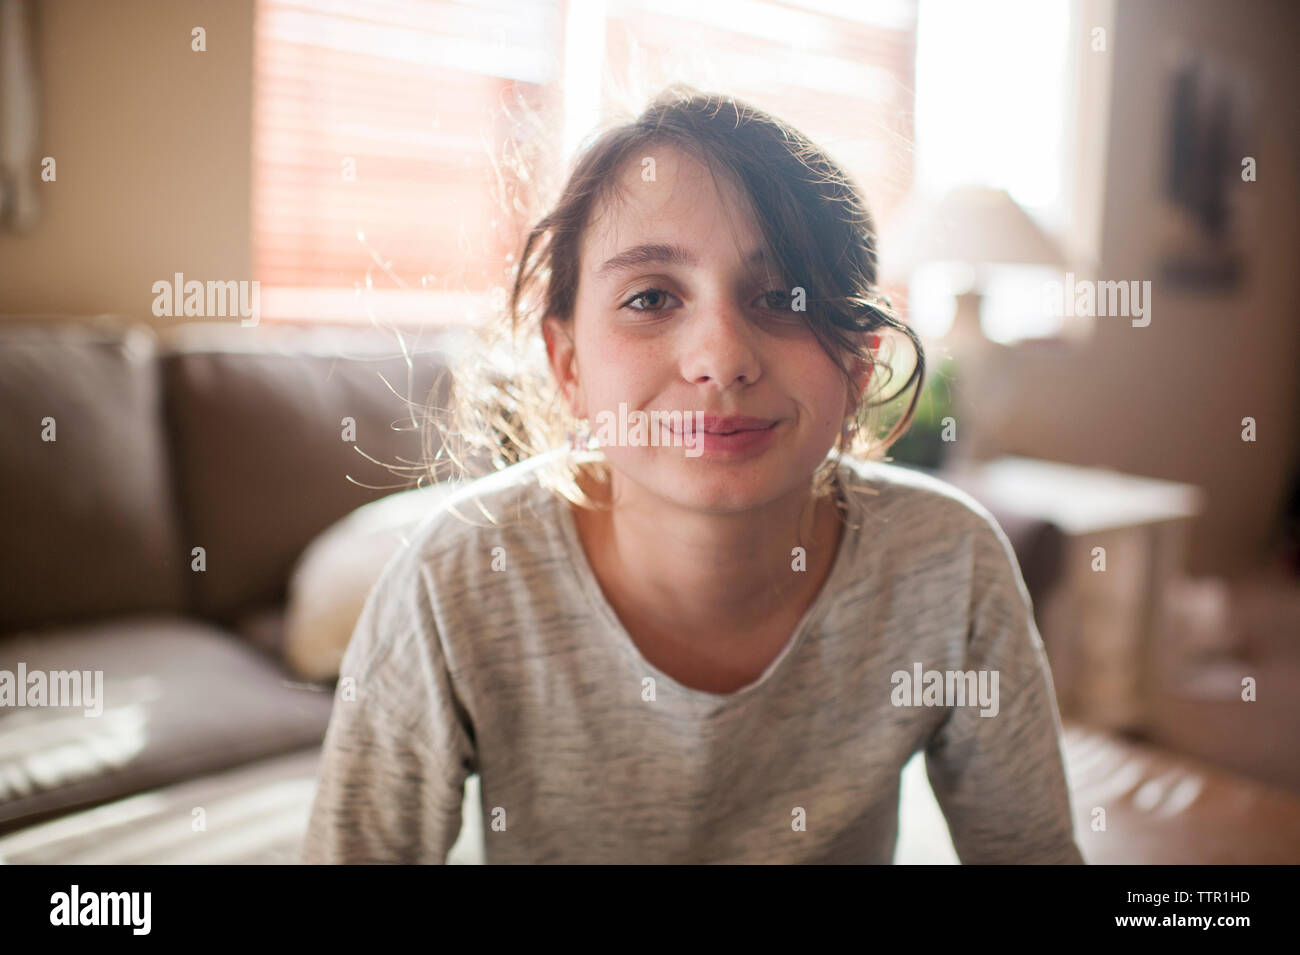 Portrait of smiling girl sitting at home Banque D'Images